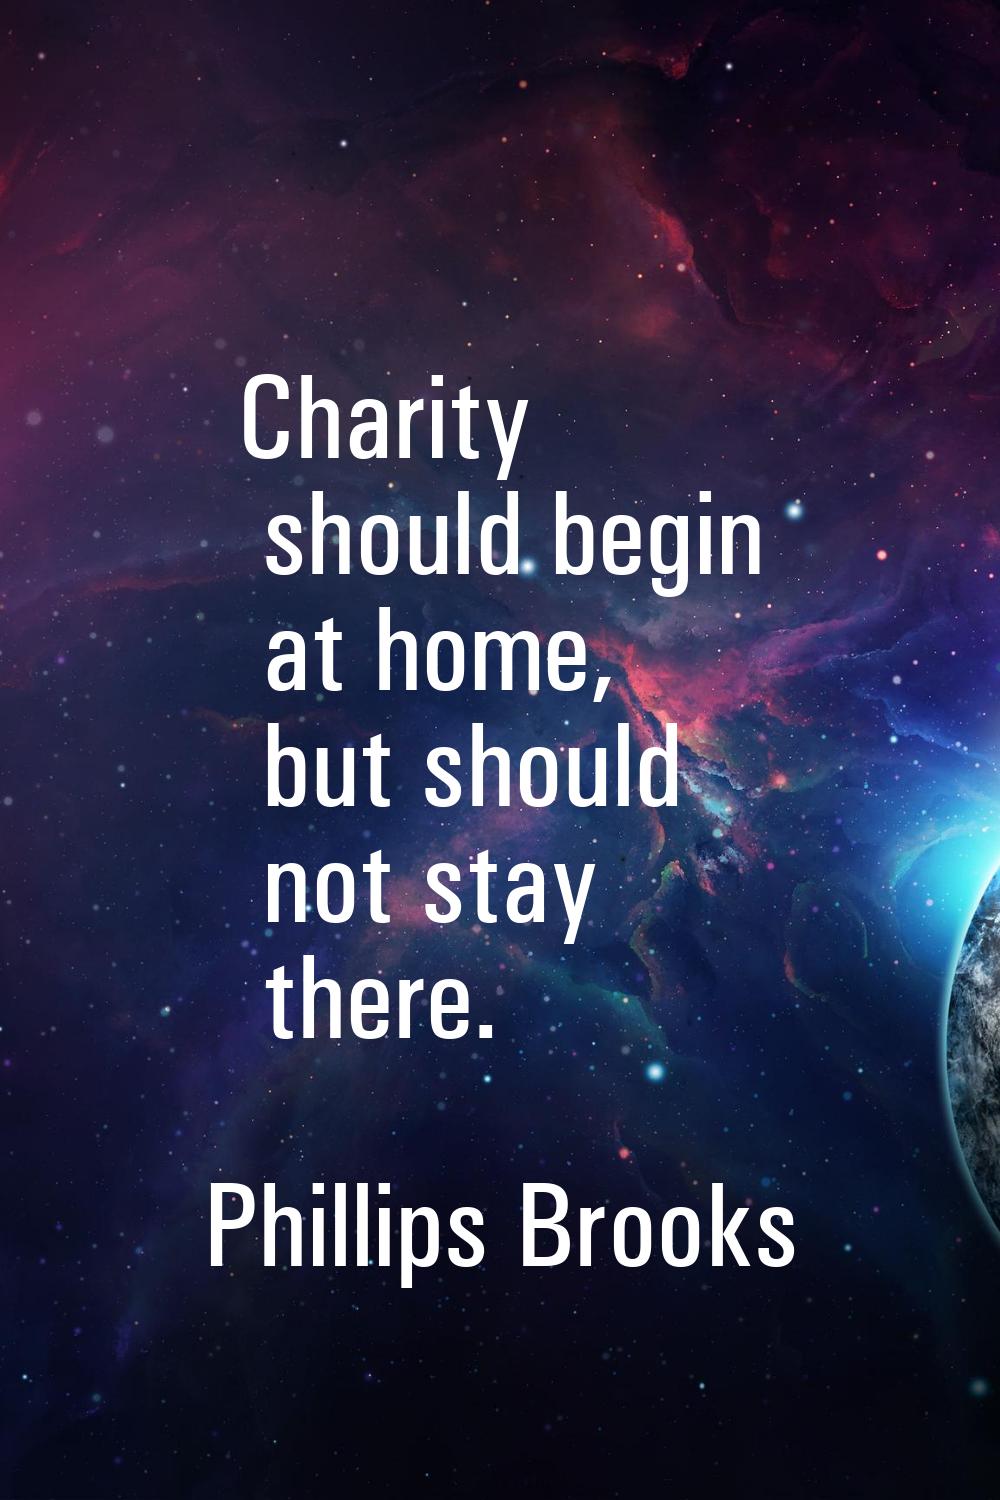 Charity should begin at home, but should not stay there.